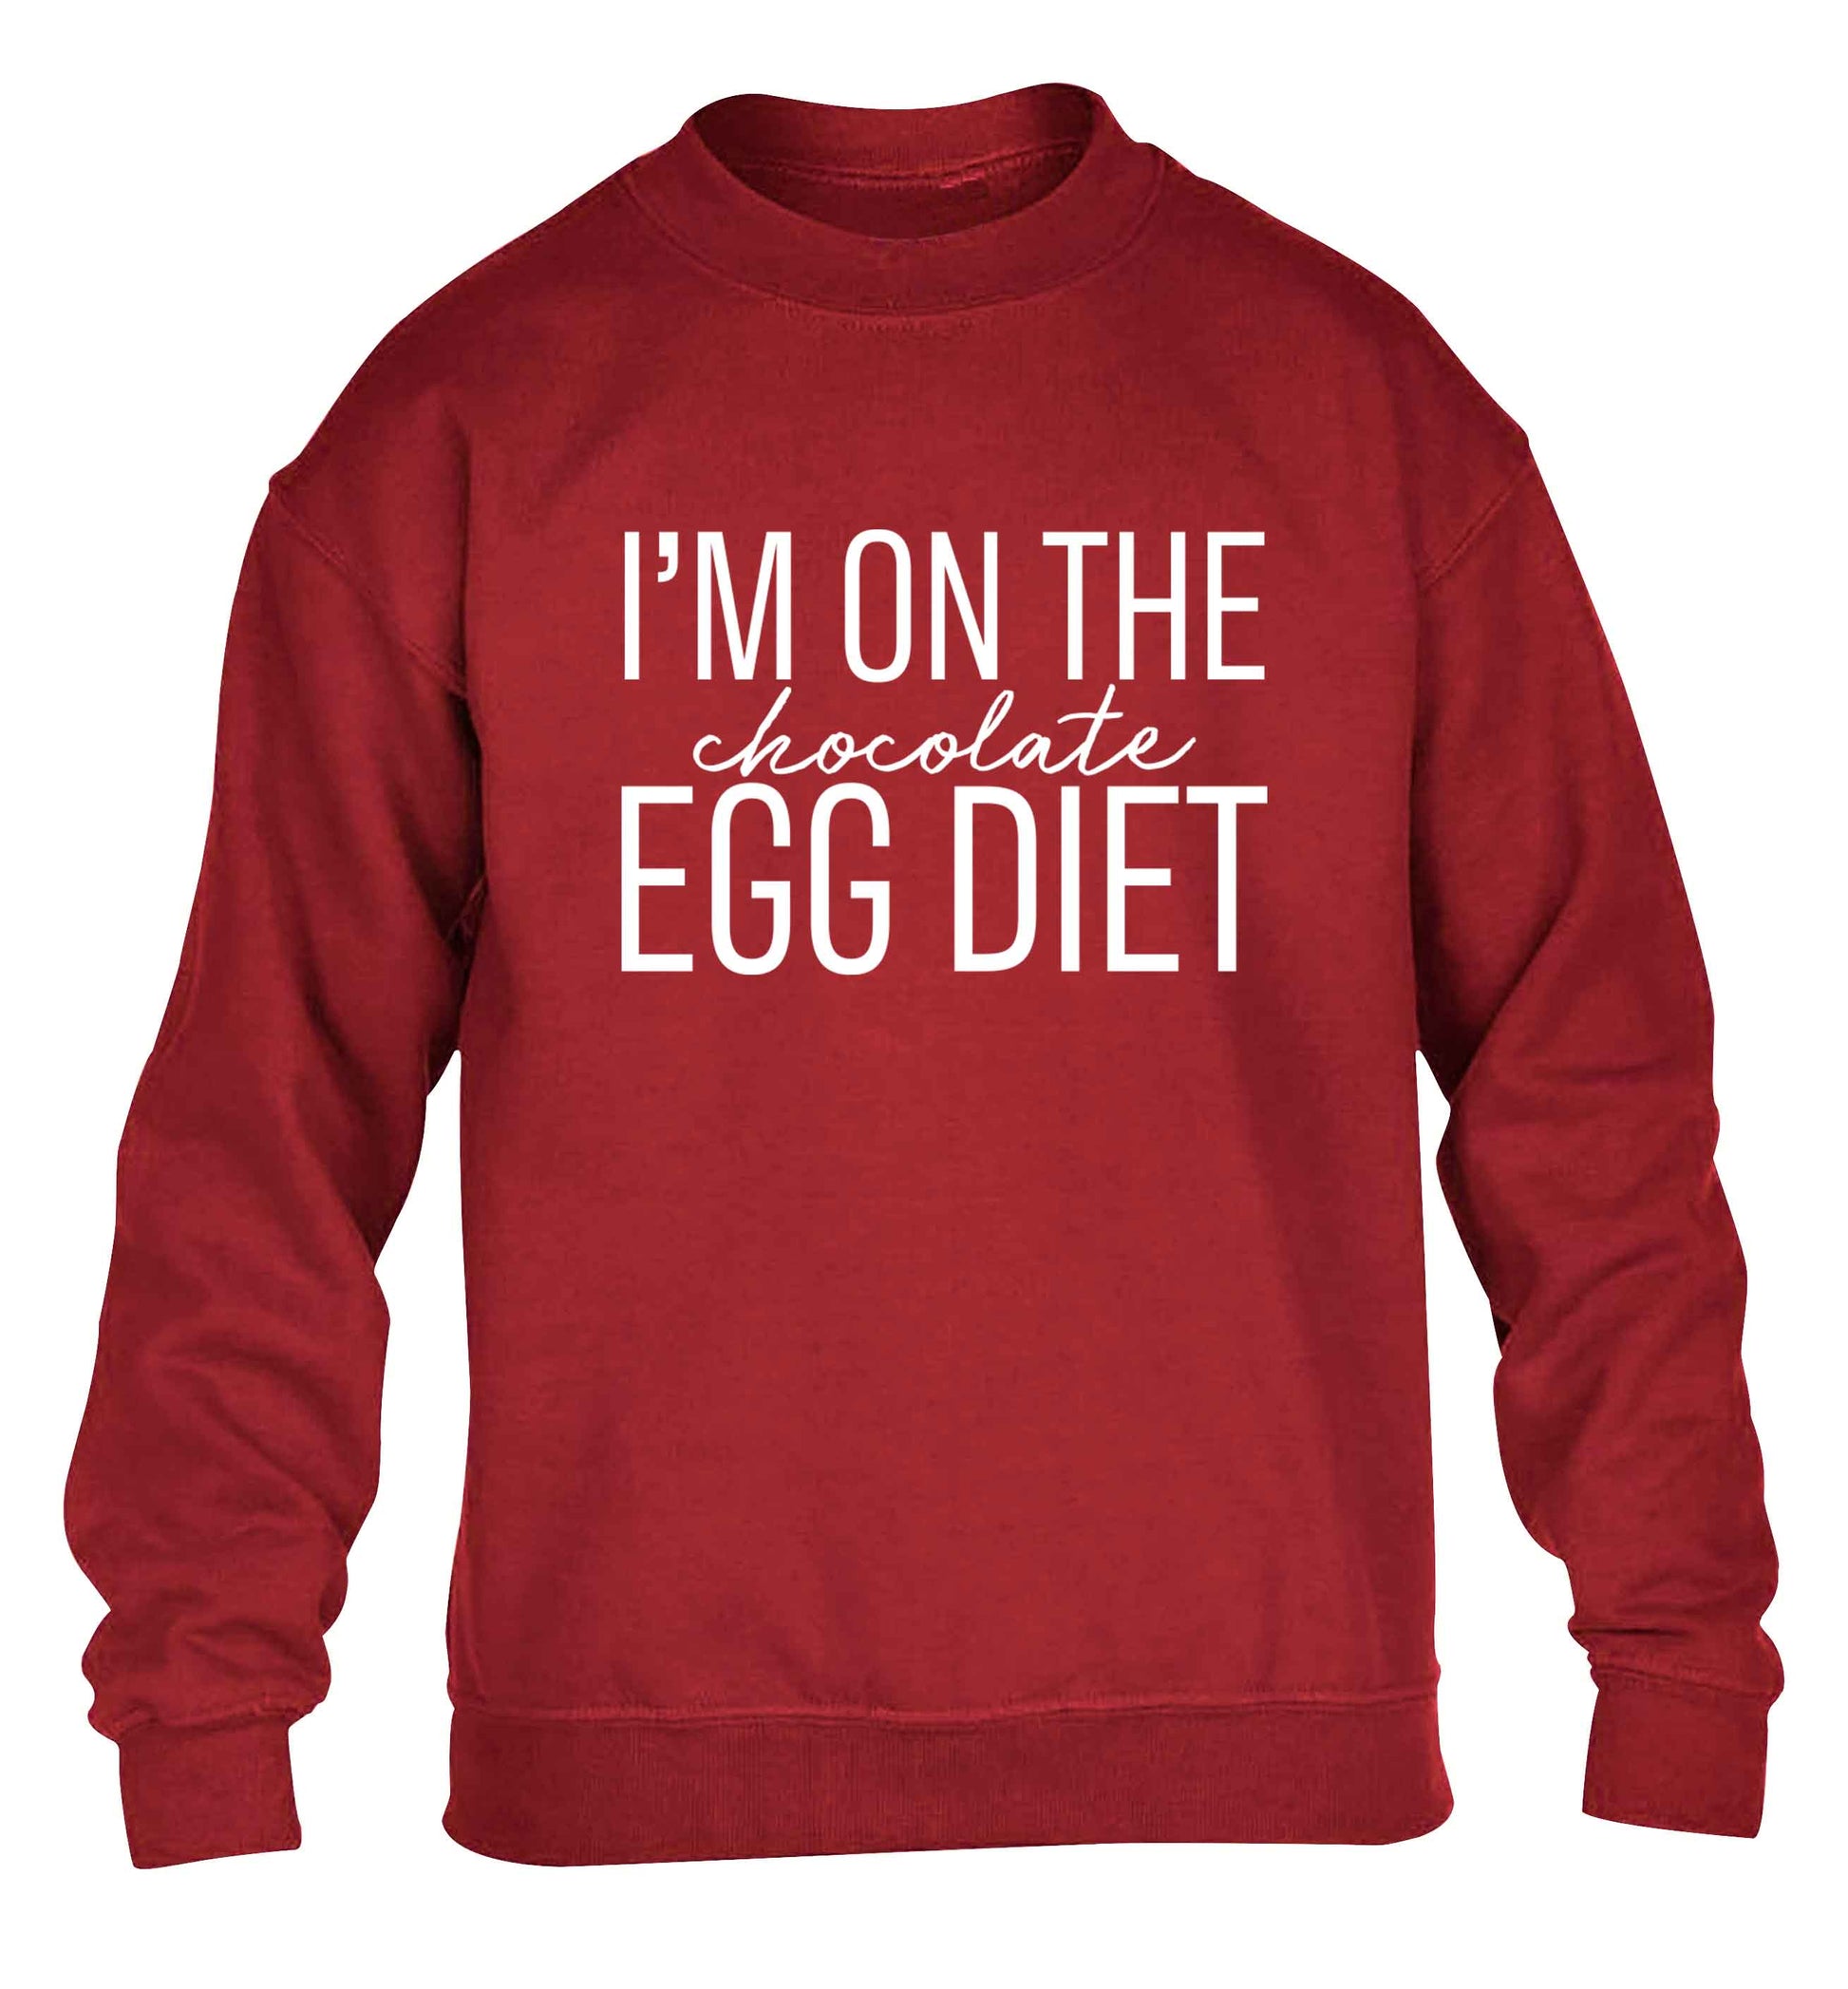 I'm on the chocolate egg diet children's grey sweater 12-13 Years